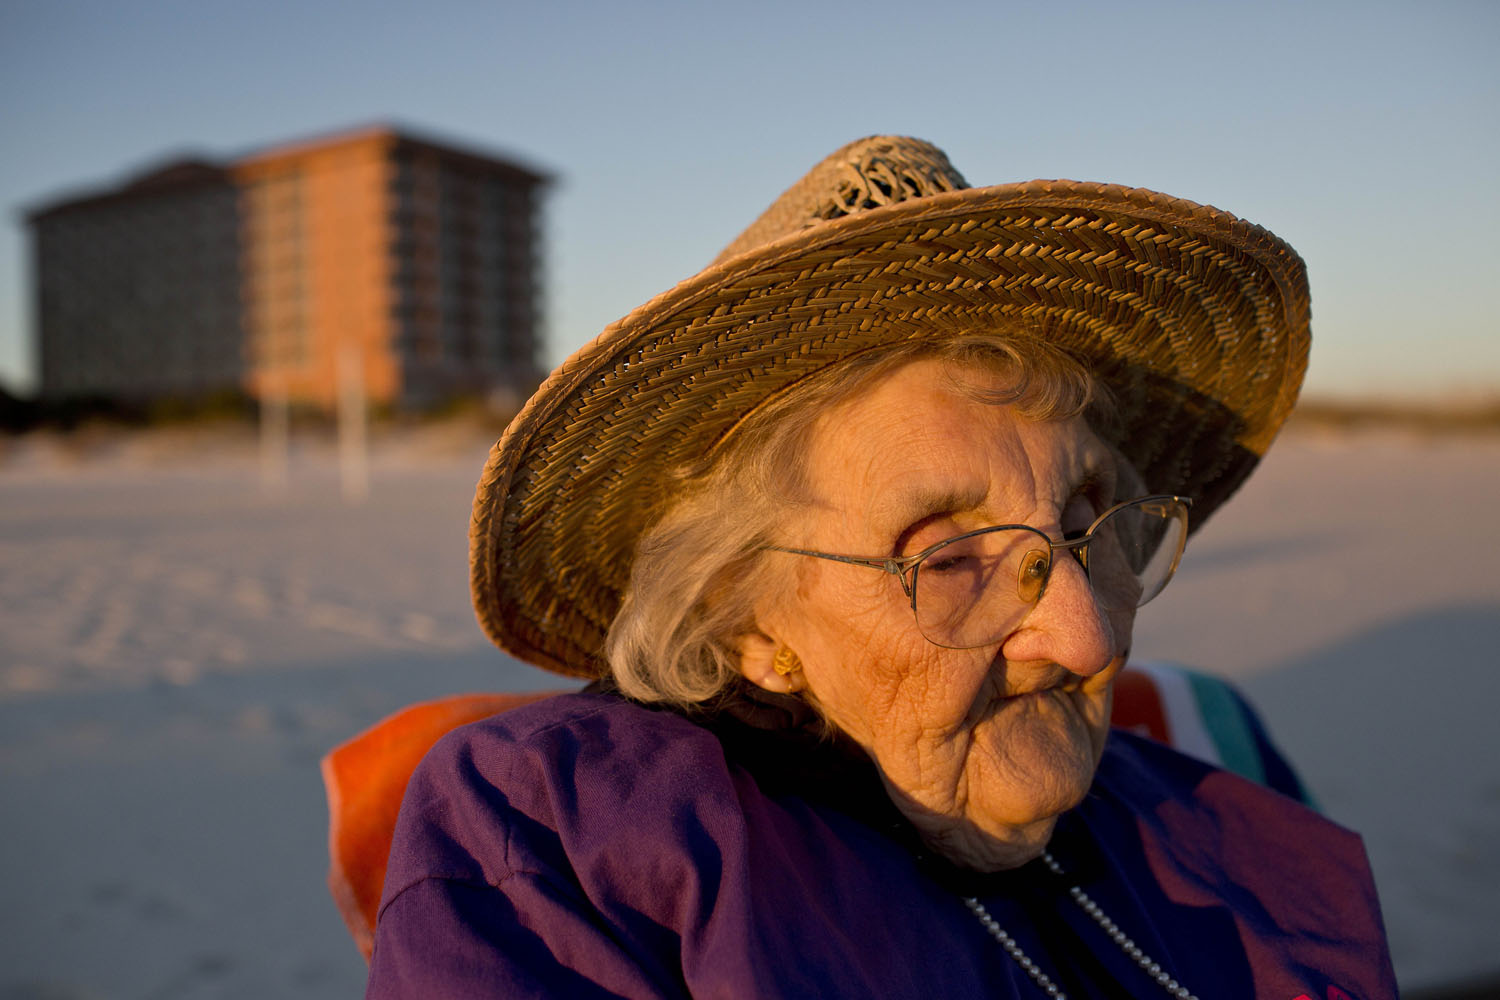 100-year-old woman takes first trip to the ocean